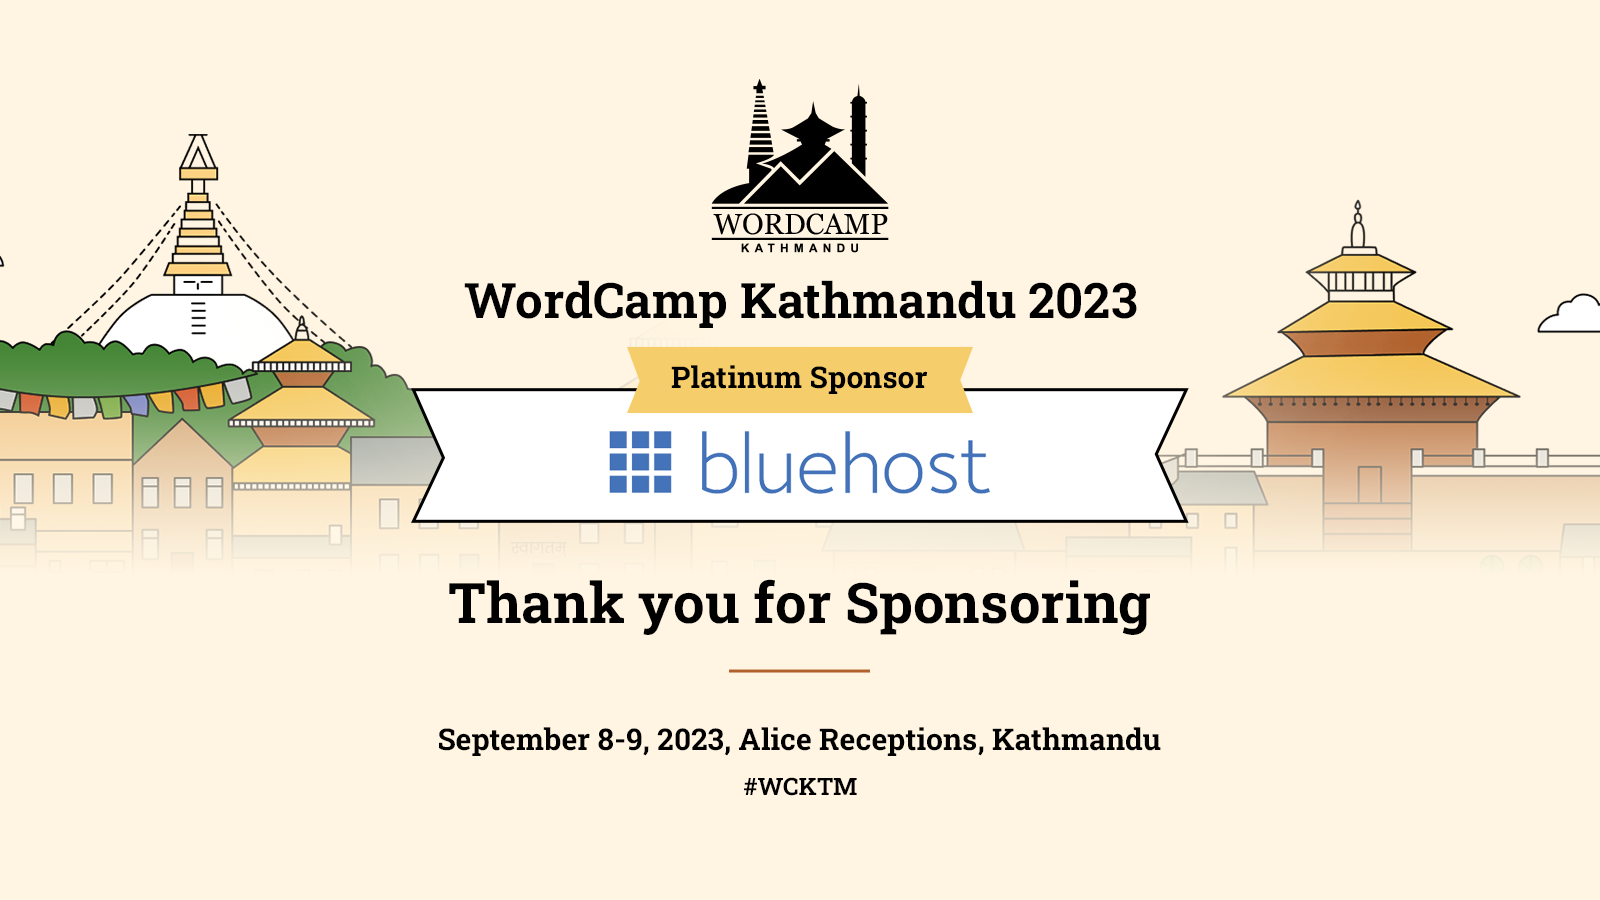 Thank you Bluehost for sponsoring